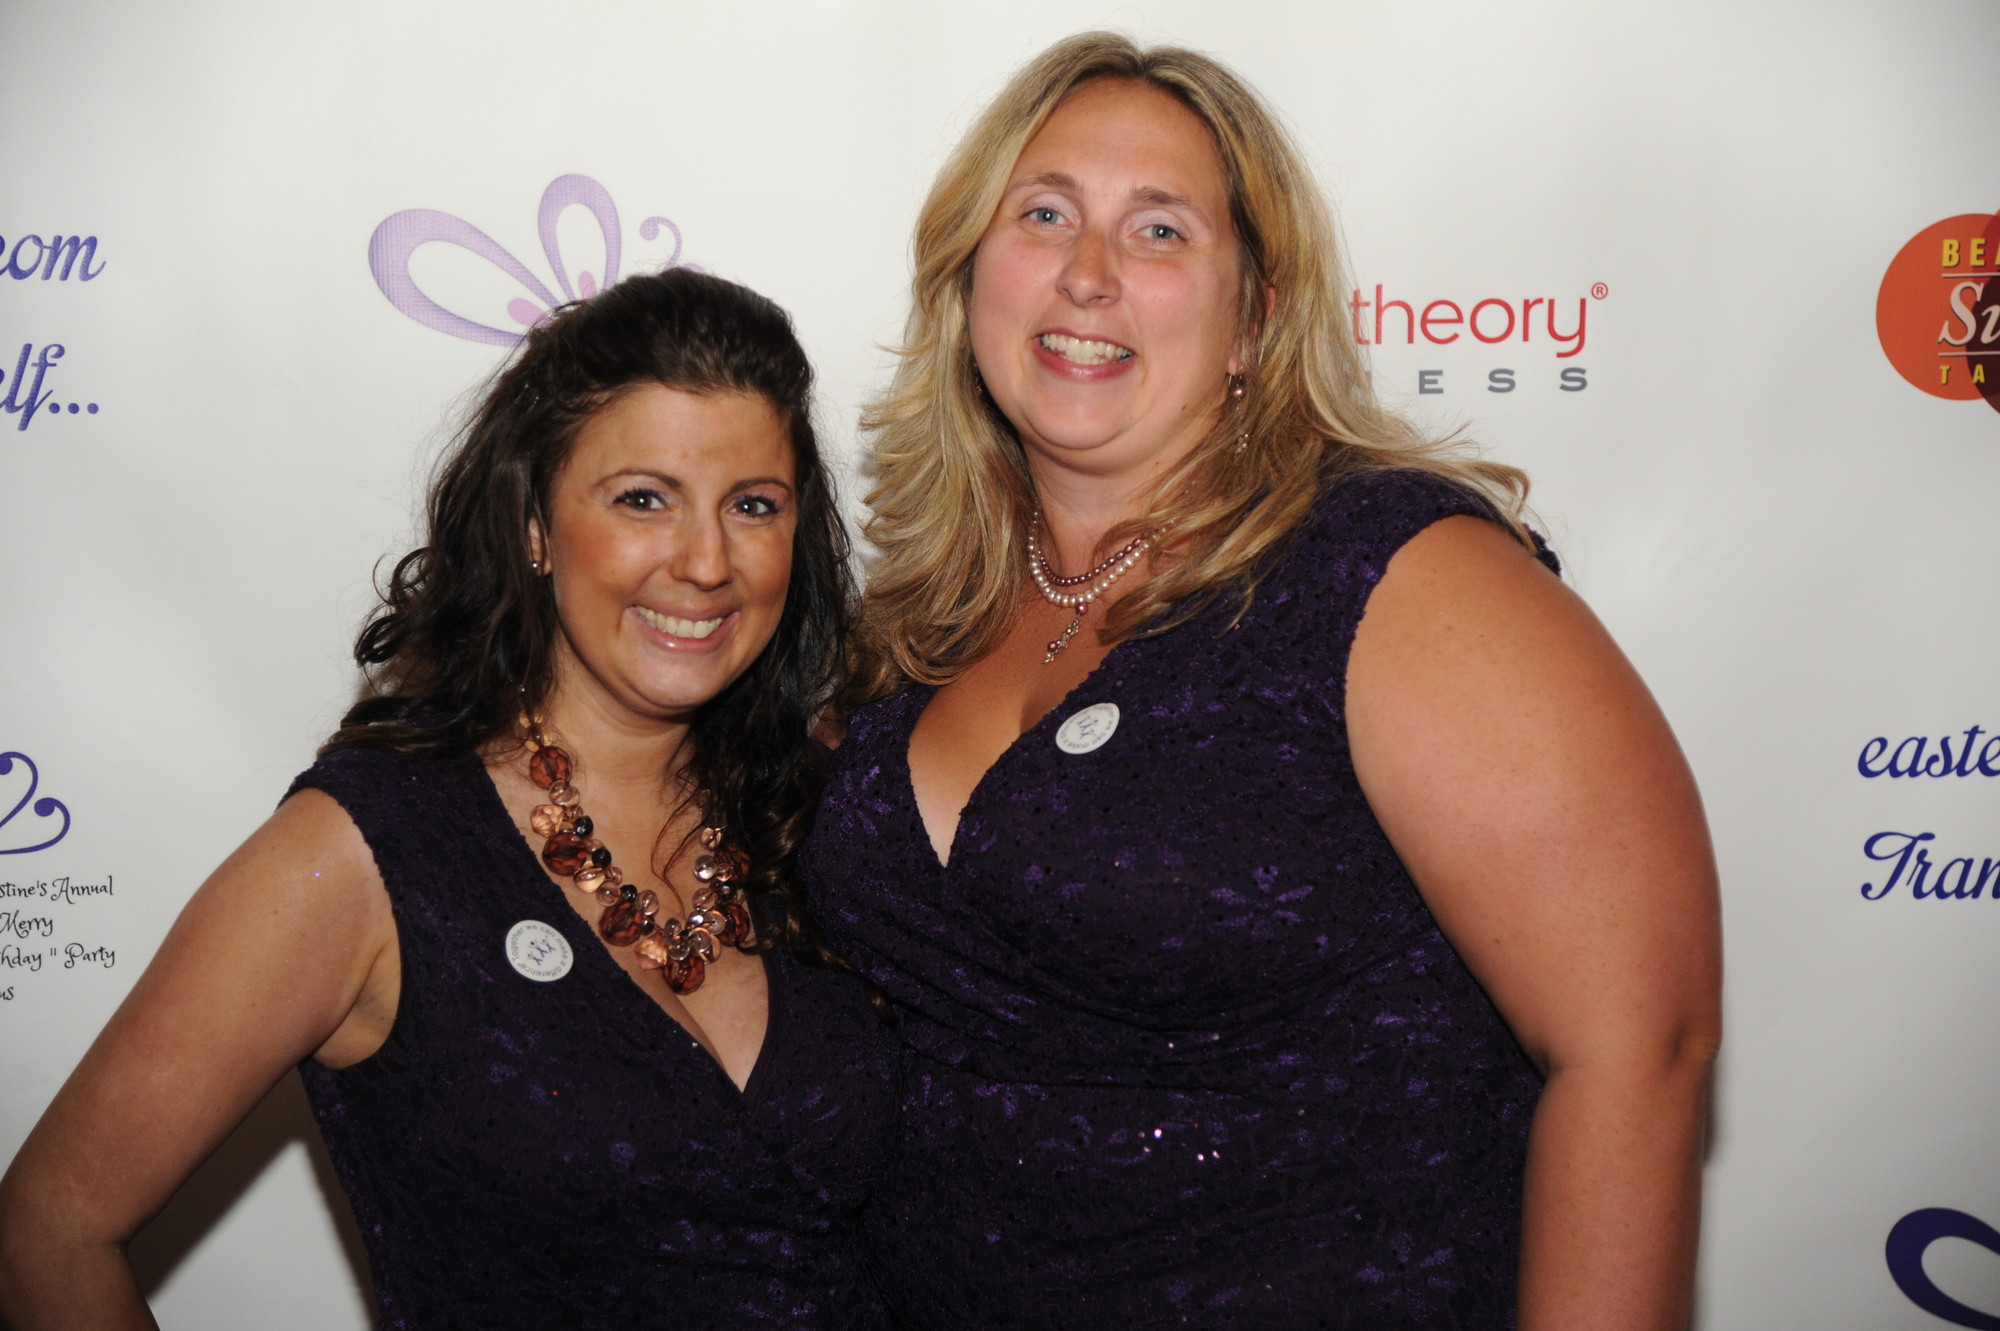 Christine Miserandino with her best friend Jennifer Ruocco, who plays a large role in each year's Purple Party